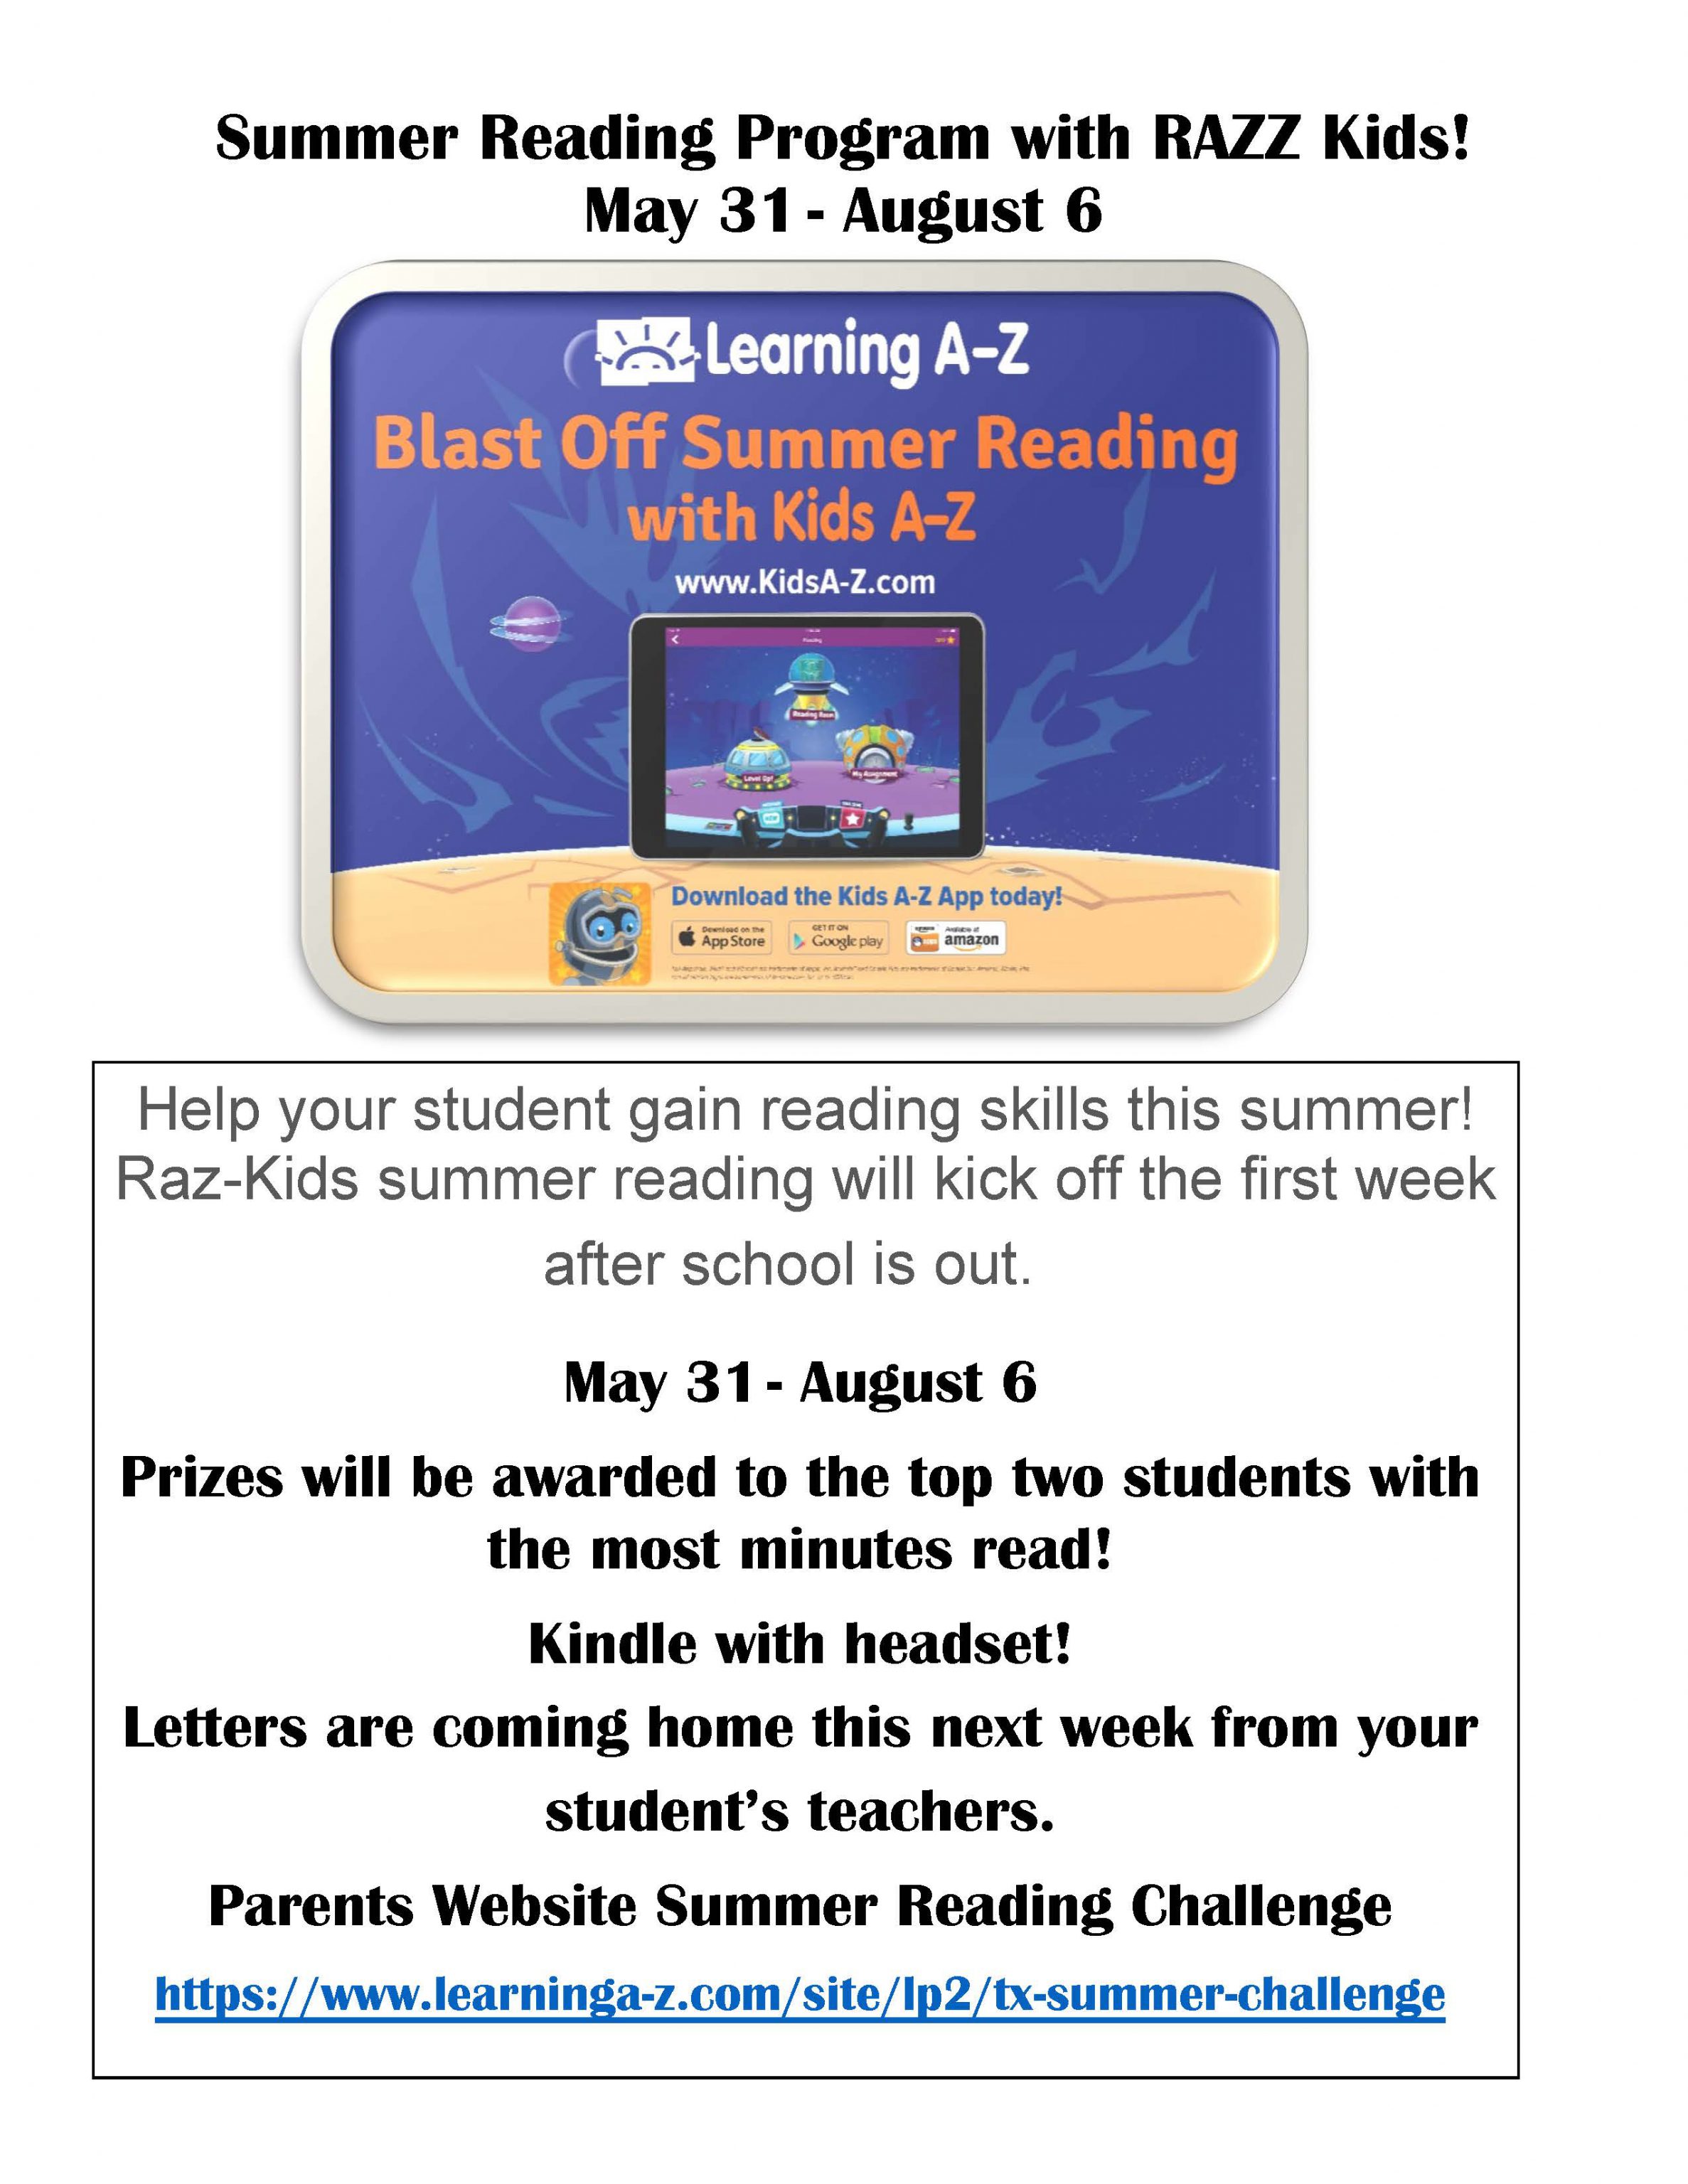 Summer Reading Program with Raz-Kids!   May 31 – August 6      Help your student gain reading skills this summer!   Raz-Kids summer reading will kick off the first week after school is out.      May 31 – August 6      Prizes will be awarded to the top two students with the most minutes read!   Kindle with headset!   Letters are coming home this week from your student’s teachers.      Parents Website Summer Reading Challenge   https://www.learninga-z.com/site/lp2/tx-summer-challenge     